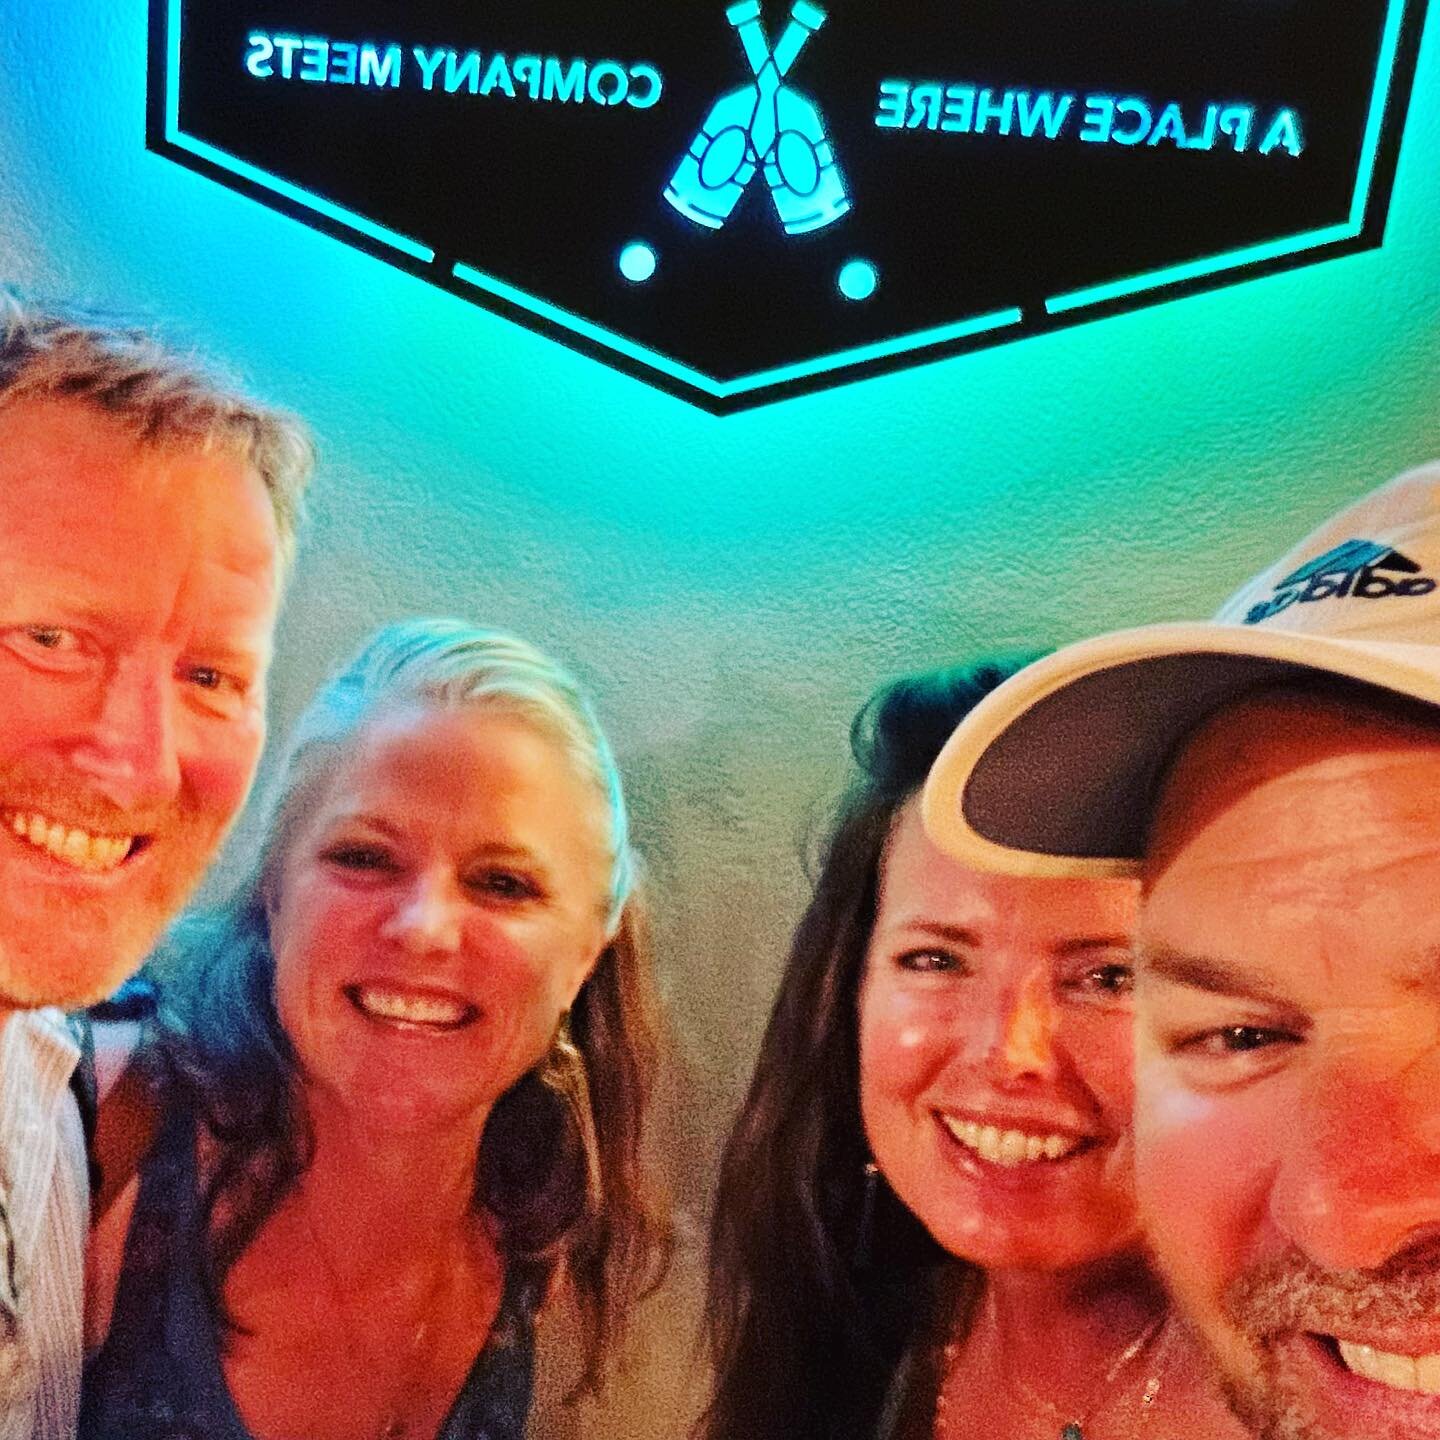 Wishing our friends a bon voyage! Had a great time at Jump Up St Croix!! Great food, vendors, music and friends! #mokojumbies #dianesrotimaster @alissab_customjewelry @thesocial.beergarden #kwabenatrio #jumpupsaintcroix #usvinice